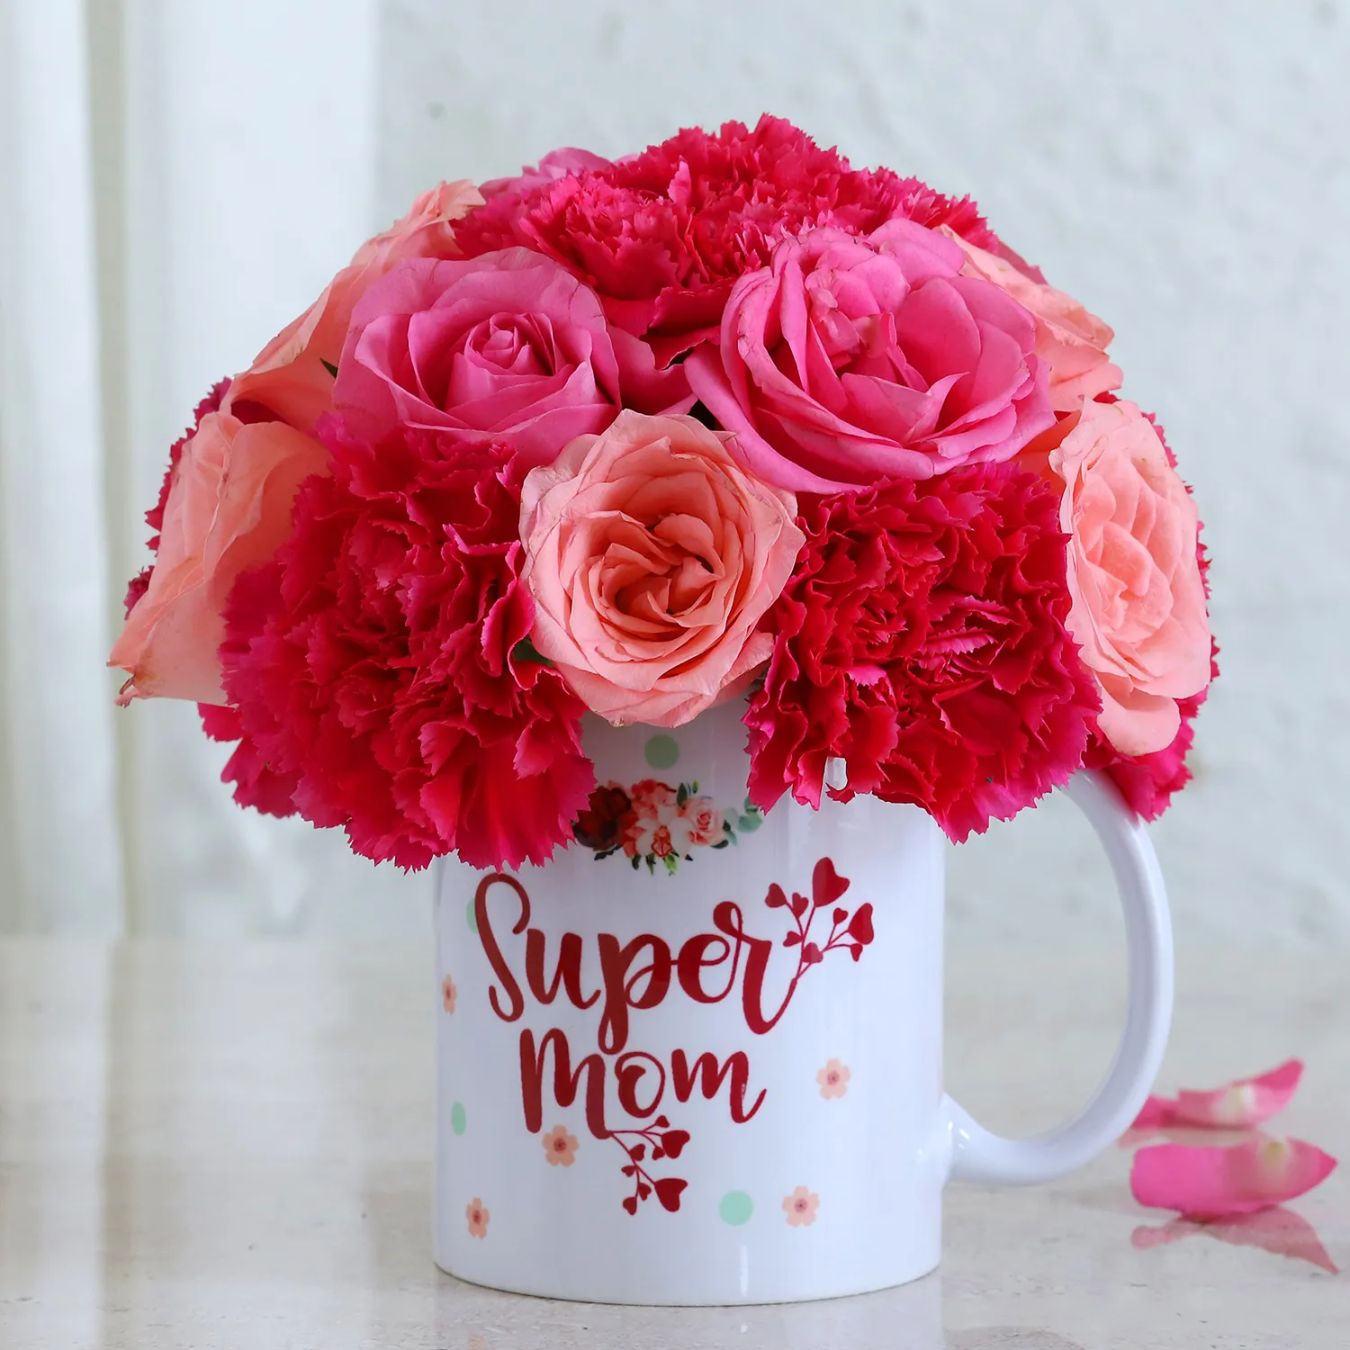 Surprise Your Mom With Beautiful Bouquets